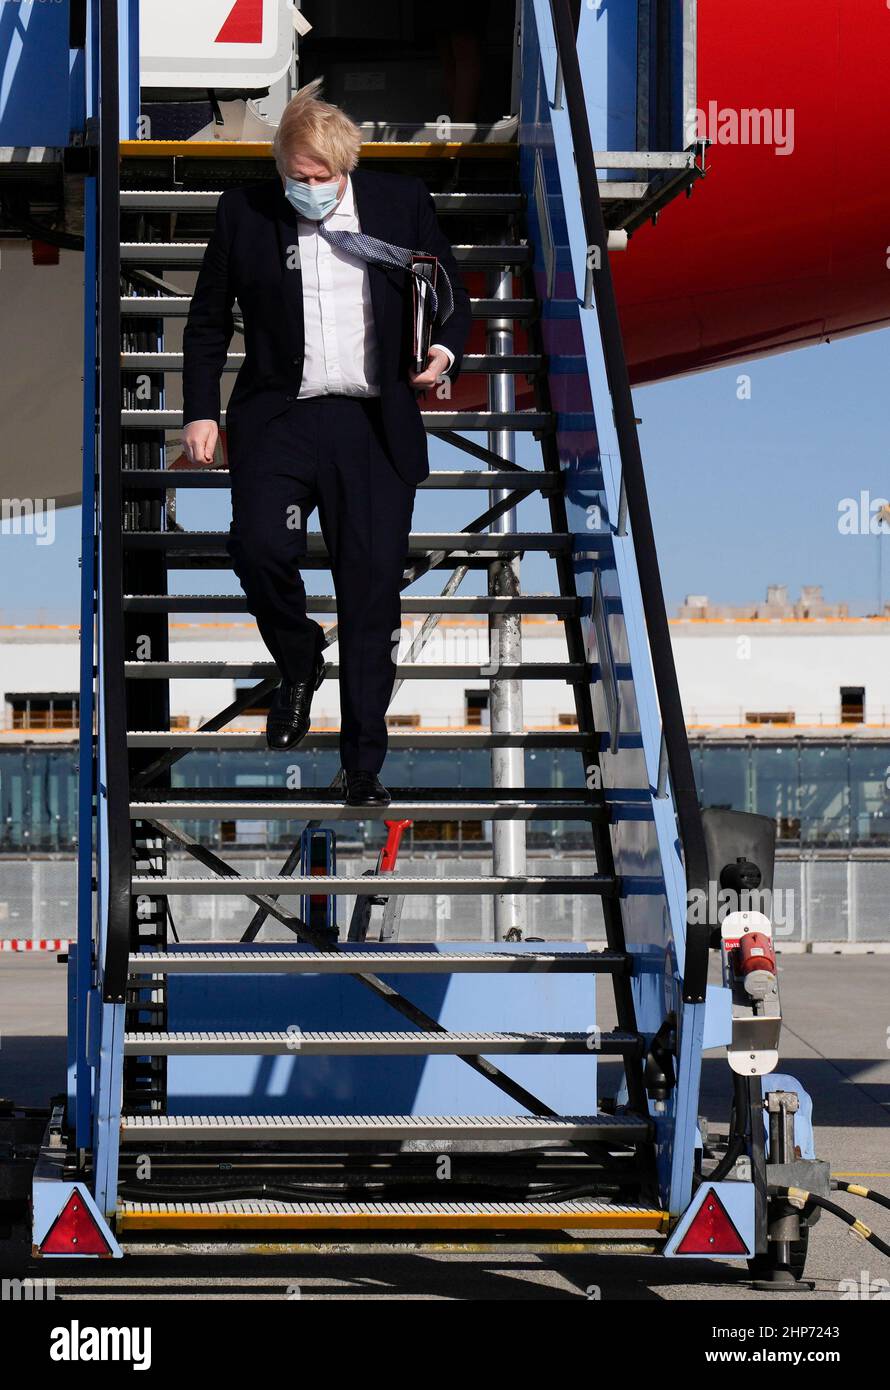 Prime Minister Boris Johnson arrives on a flight in Munich, Germany, to attend the Munich Security Conference and meet with world leaders to discuss tensions in eastern Europe. Picture date: Saturday February 19, 2022. Stock Photo